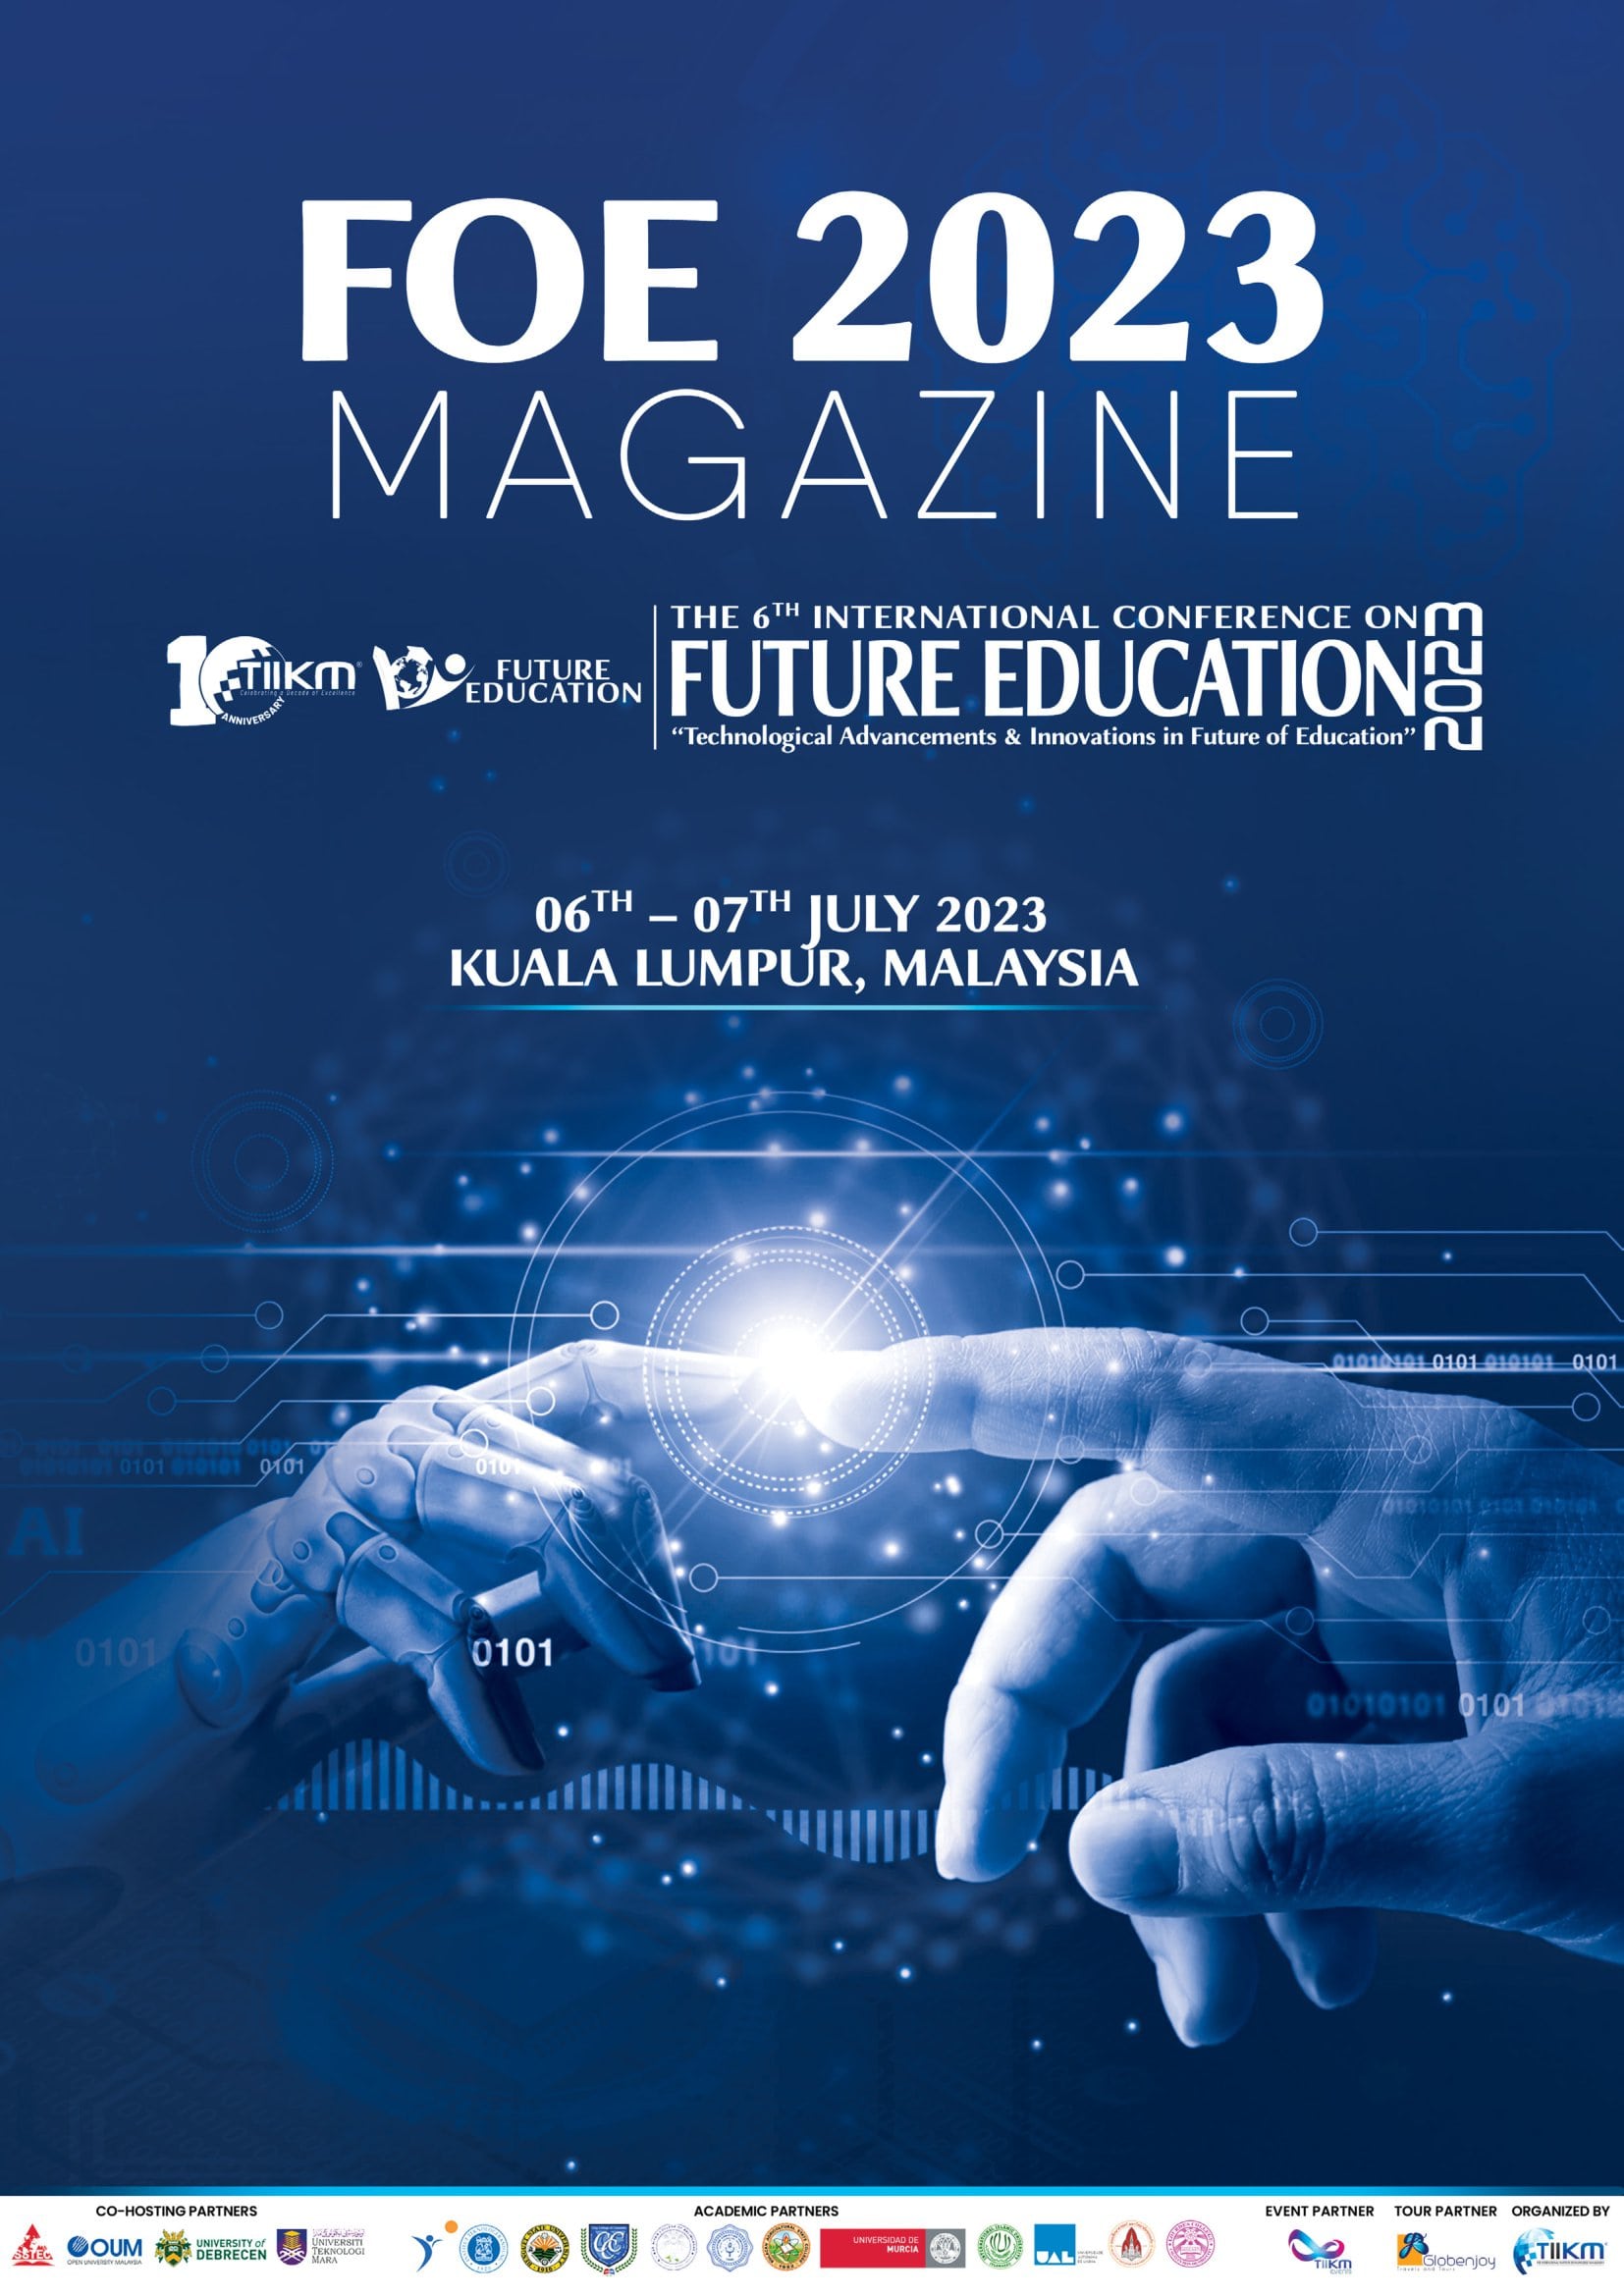 foe-winners - The 6th International Conference on Future of Education 2023